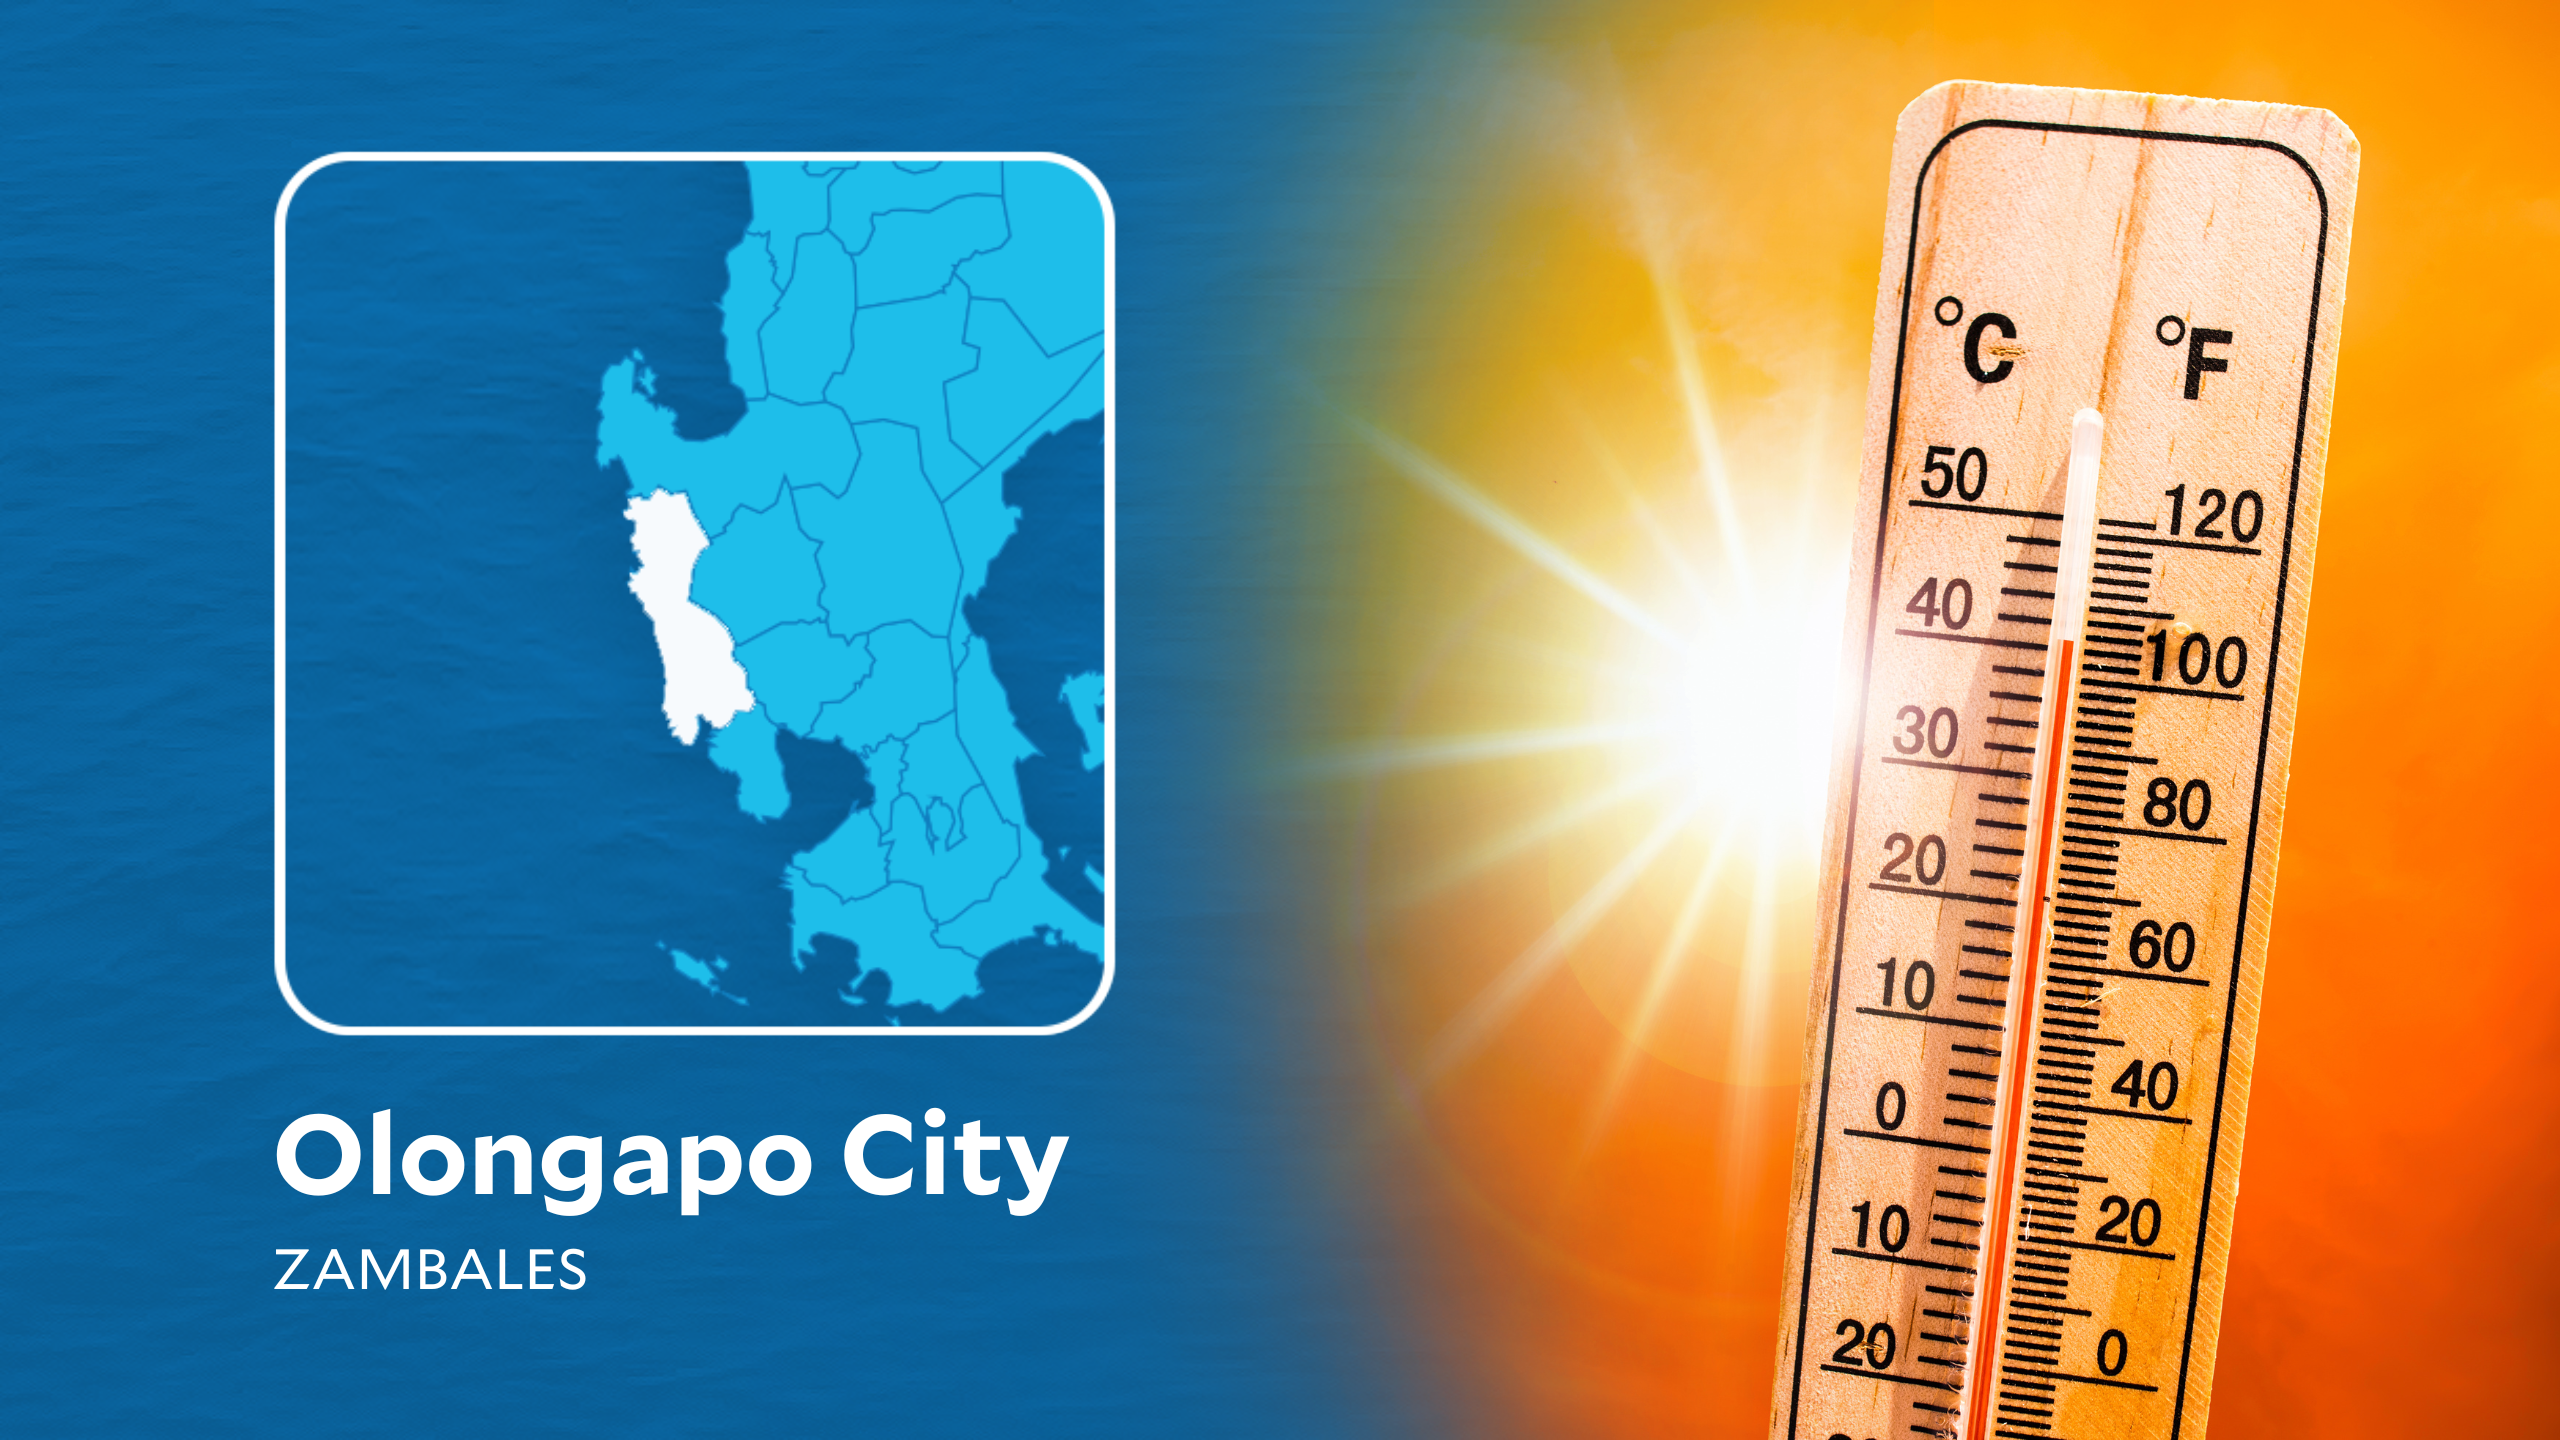 Olongapo City to experience dangerous heat index for 2 straight days